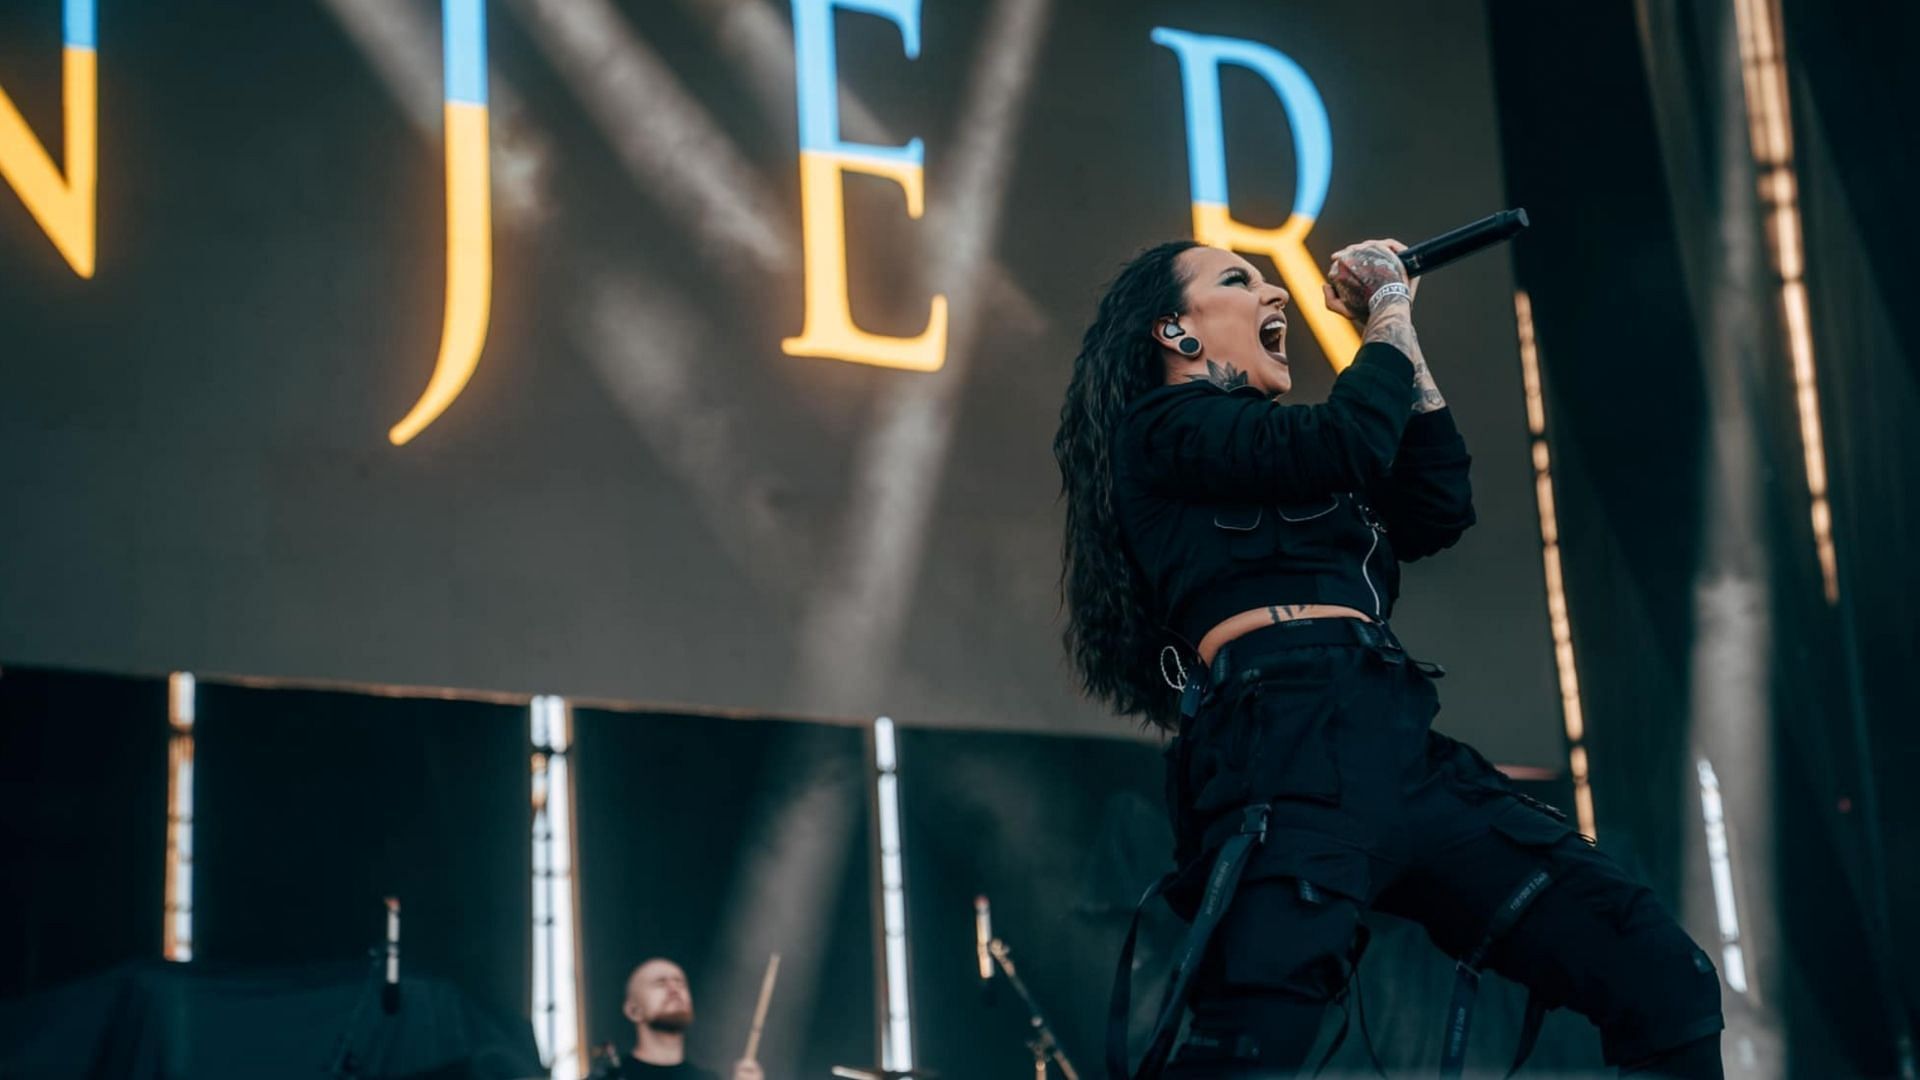 Jinjer US Tour 2022 Tickets, presale, where to buy, dates and more